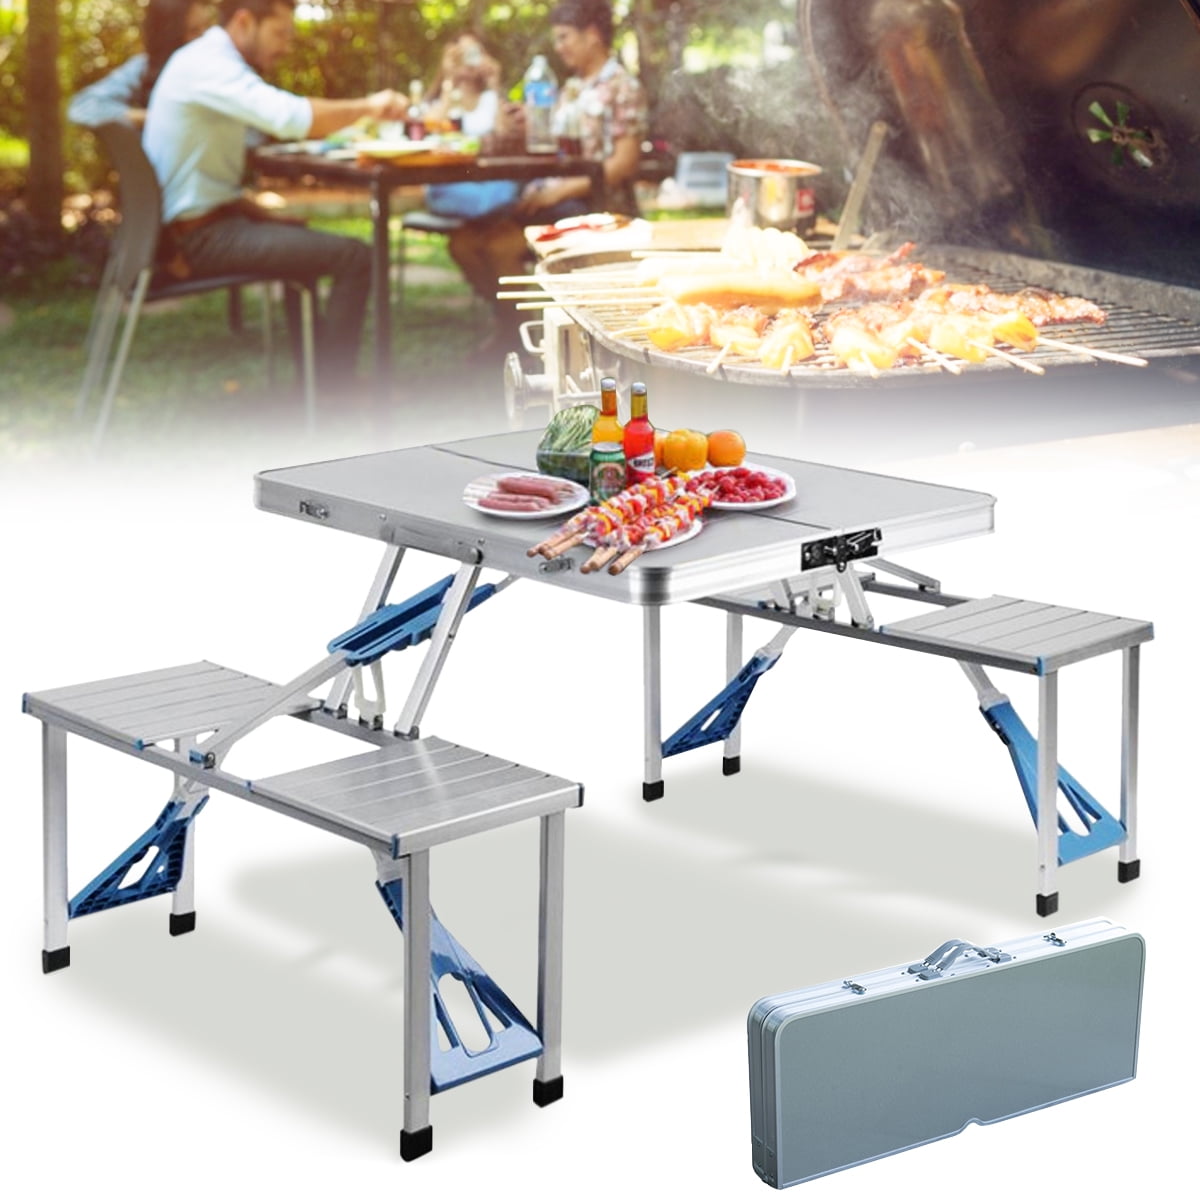 Silver Picnic Tables Foldable with Chairs for 4 Persons BBQ Party Exhibition Indoor or Outdoor naspaluro Camping Folding Table and Chairs Set with Aluminum Frame & an Umbrella Role